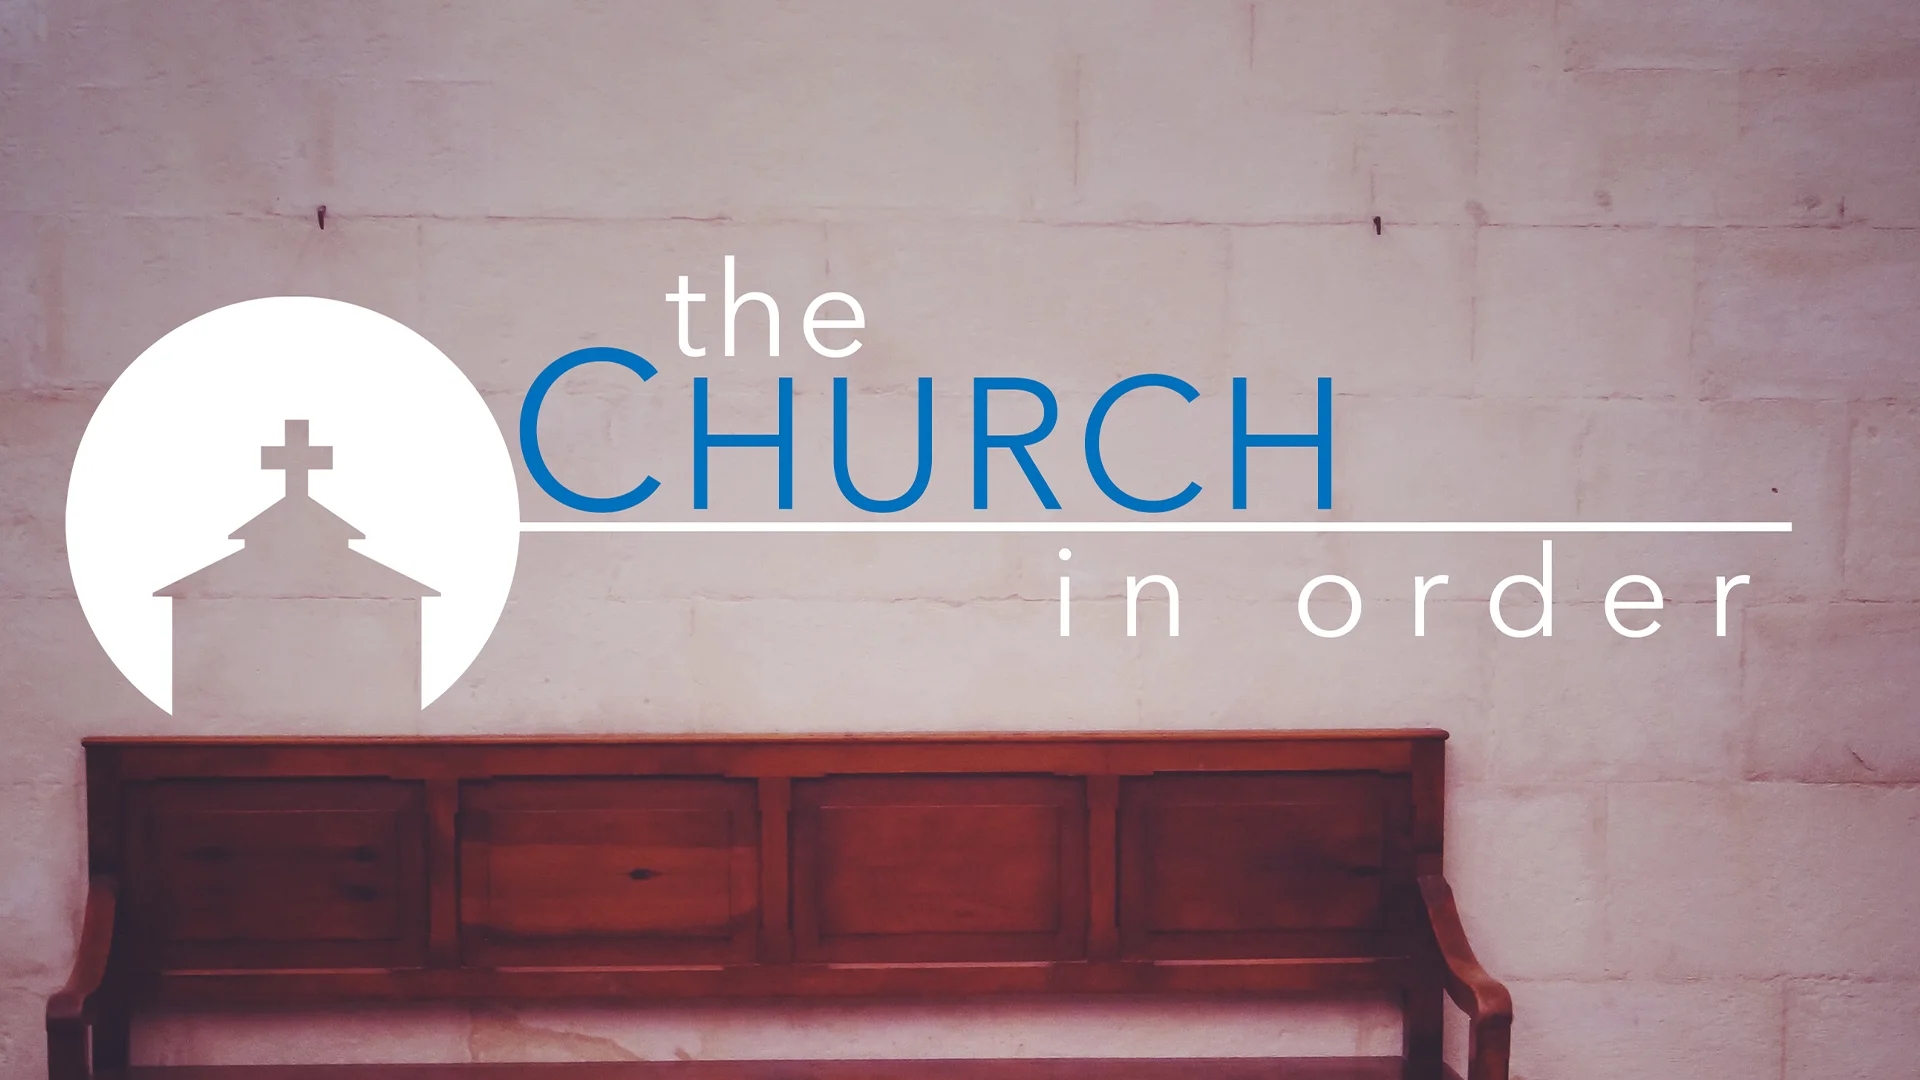 Titus: The Church in Order